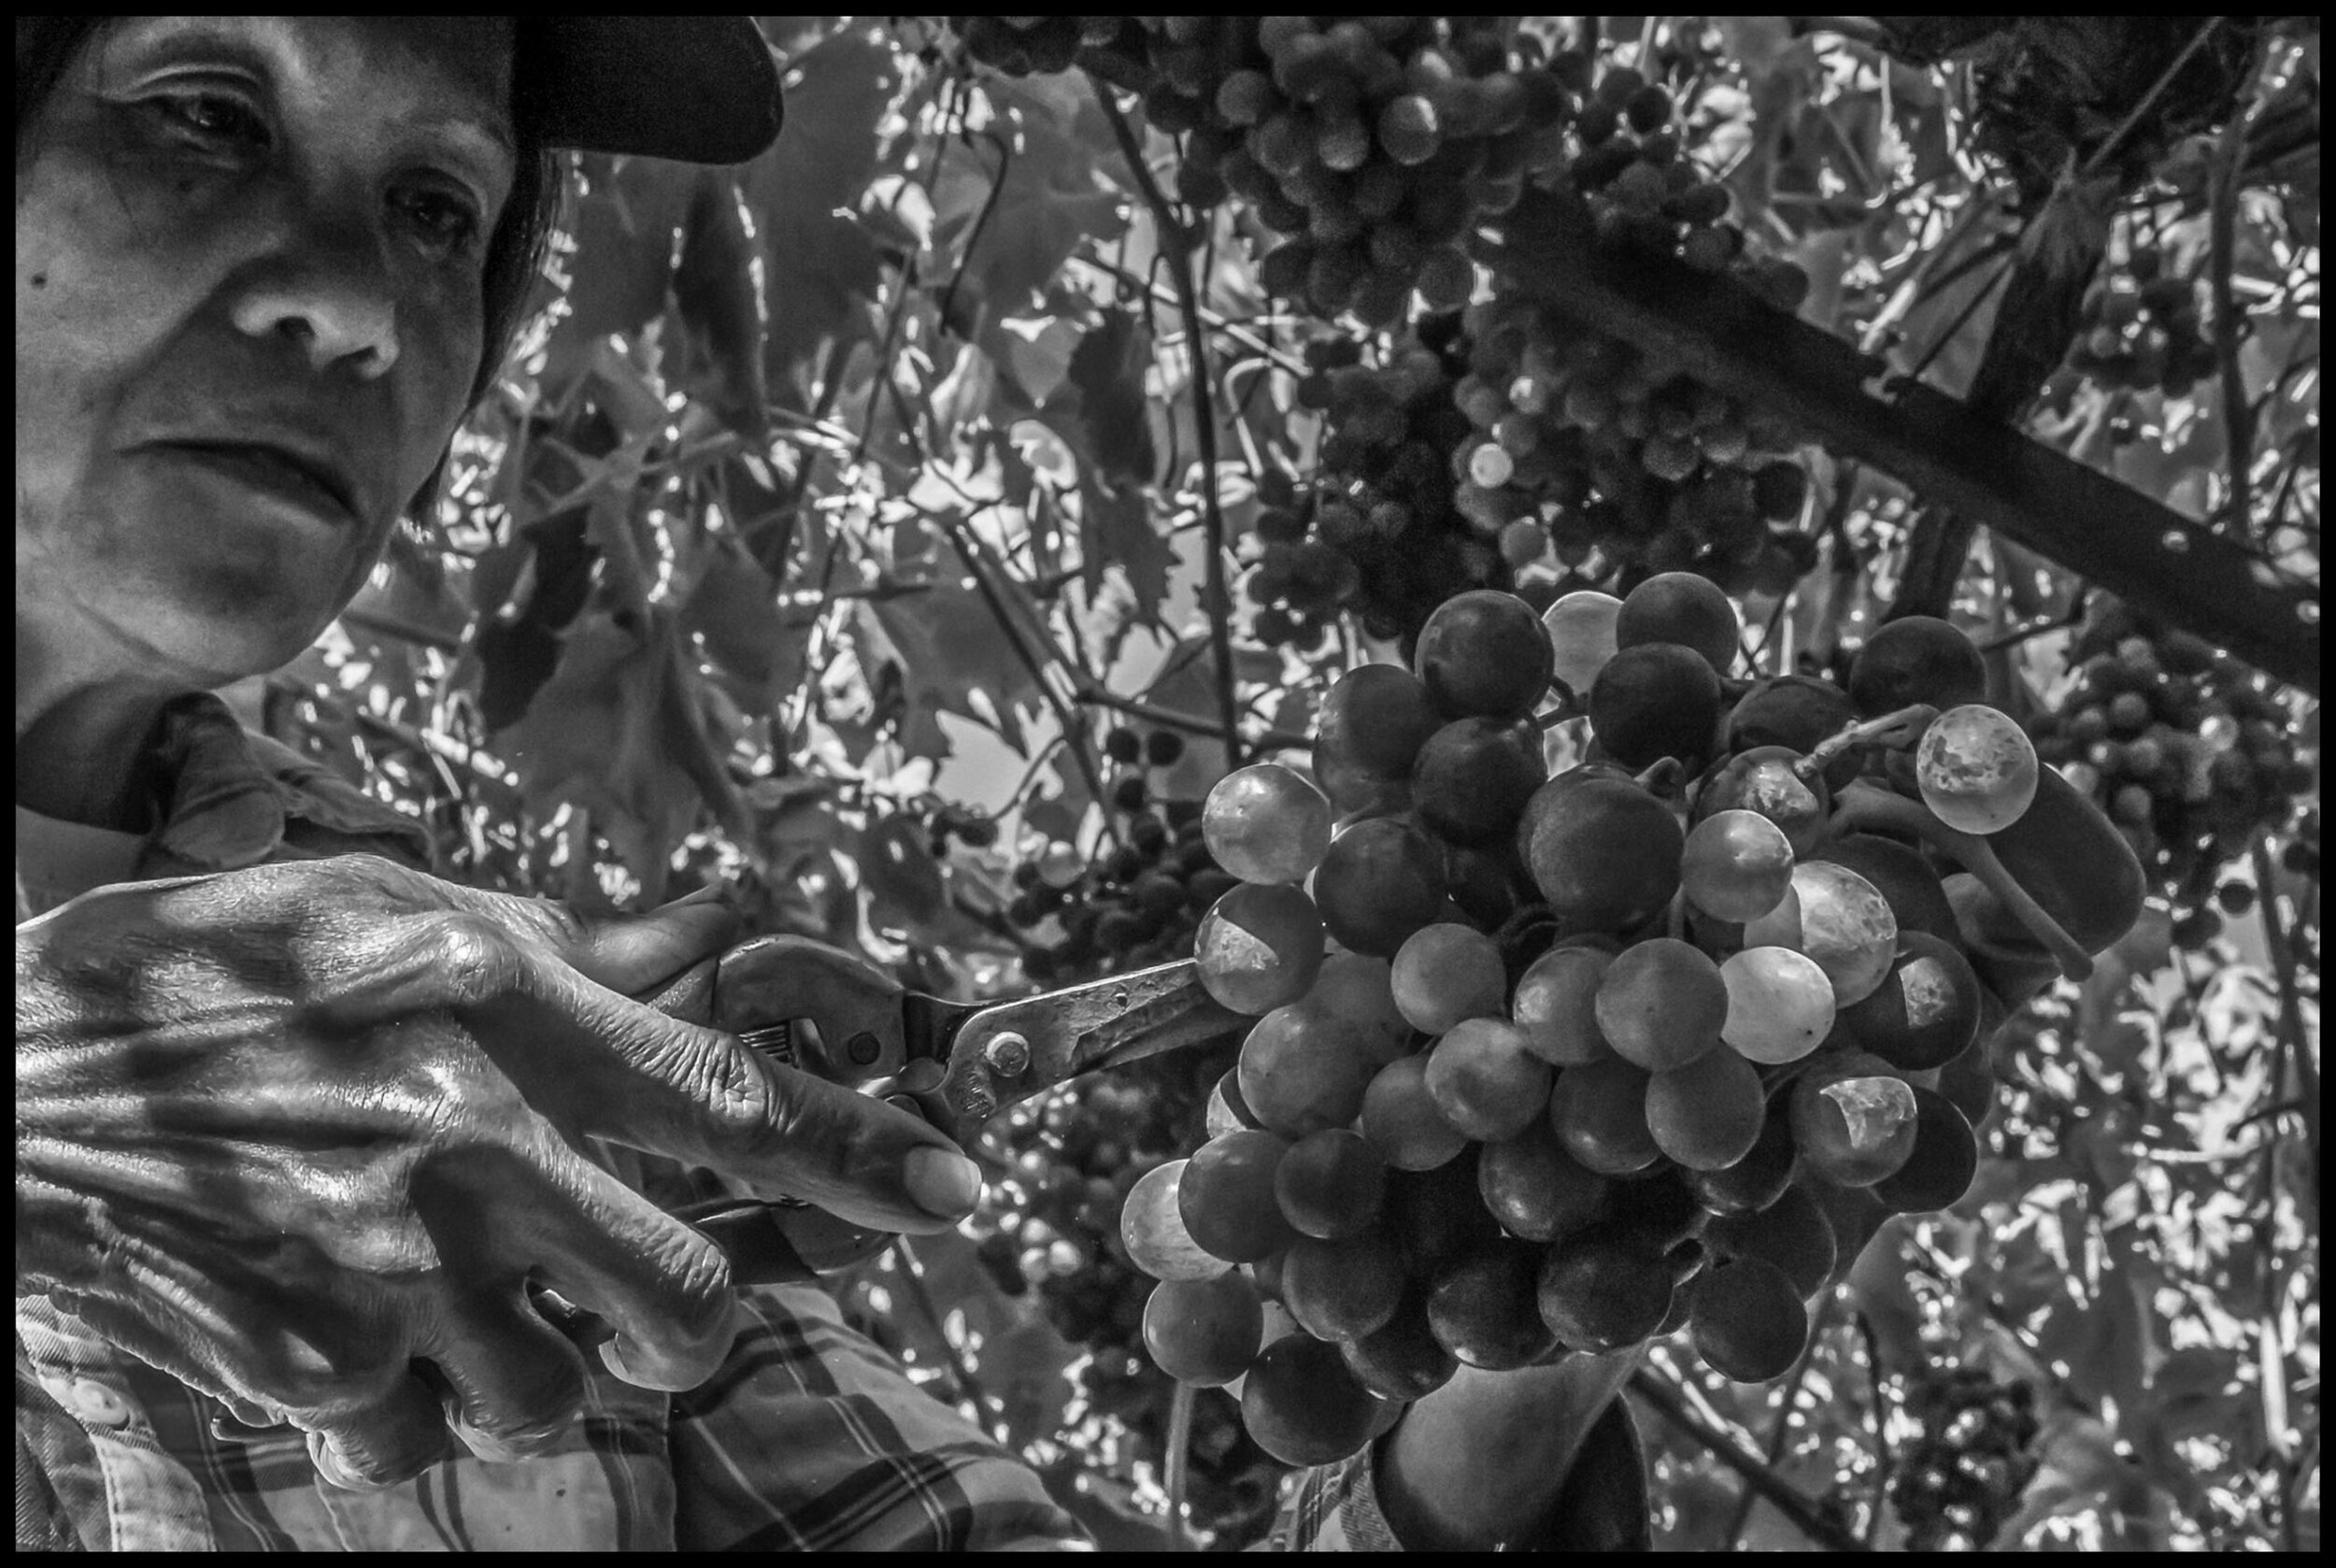 A vineyard in California’s San Joaquin Valley. Annie Domingo came from Laoag, in Ilocos Norte province of the Philippines, 43 years ago.